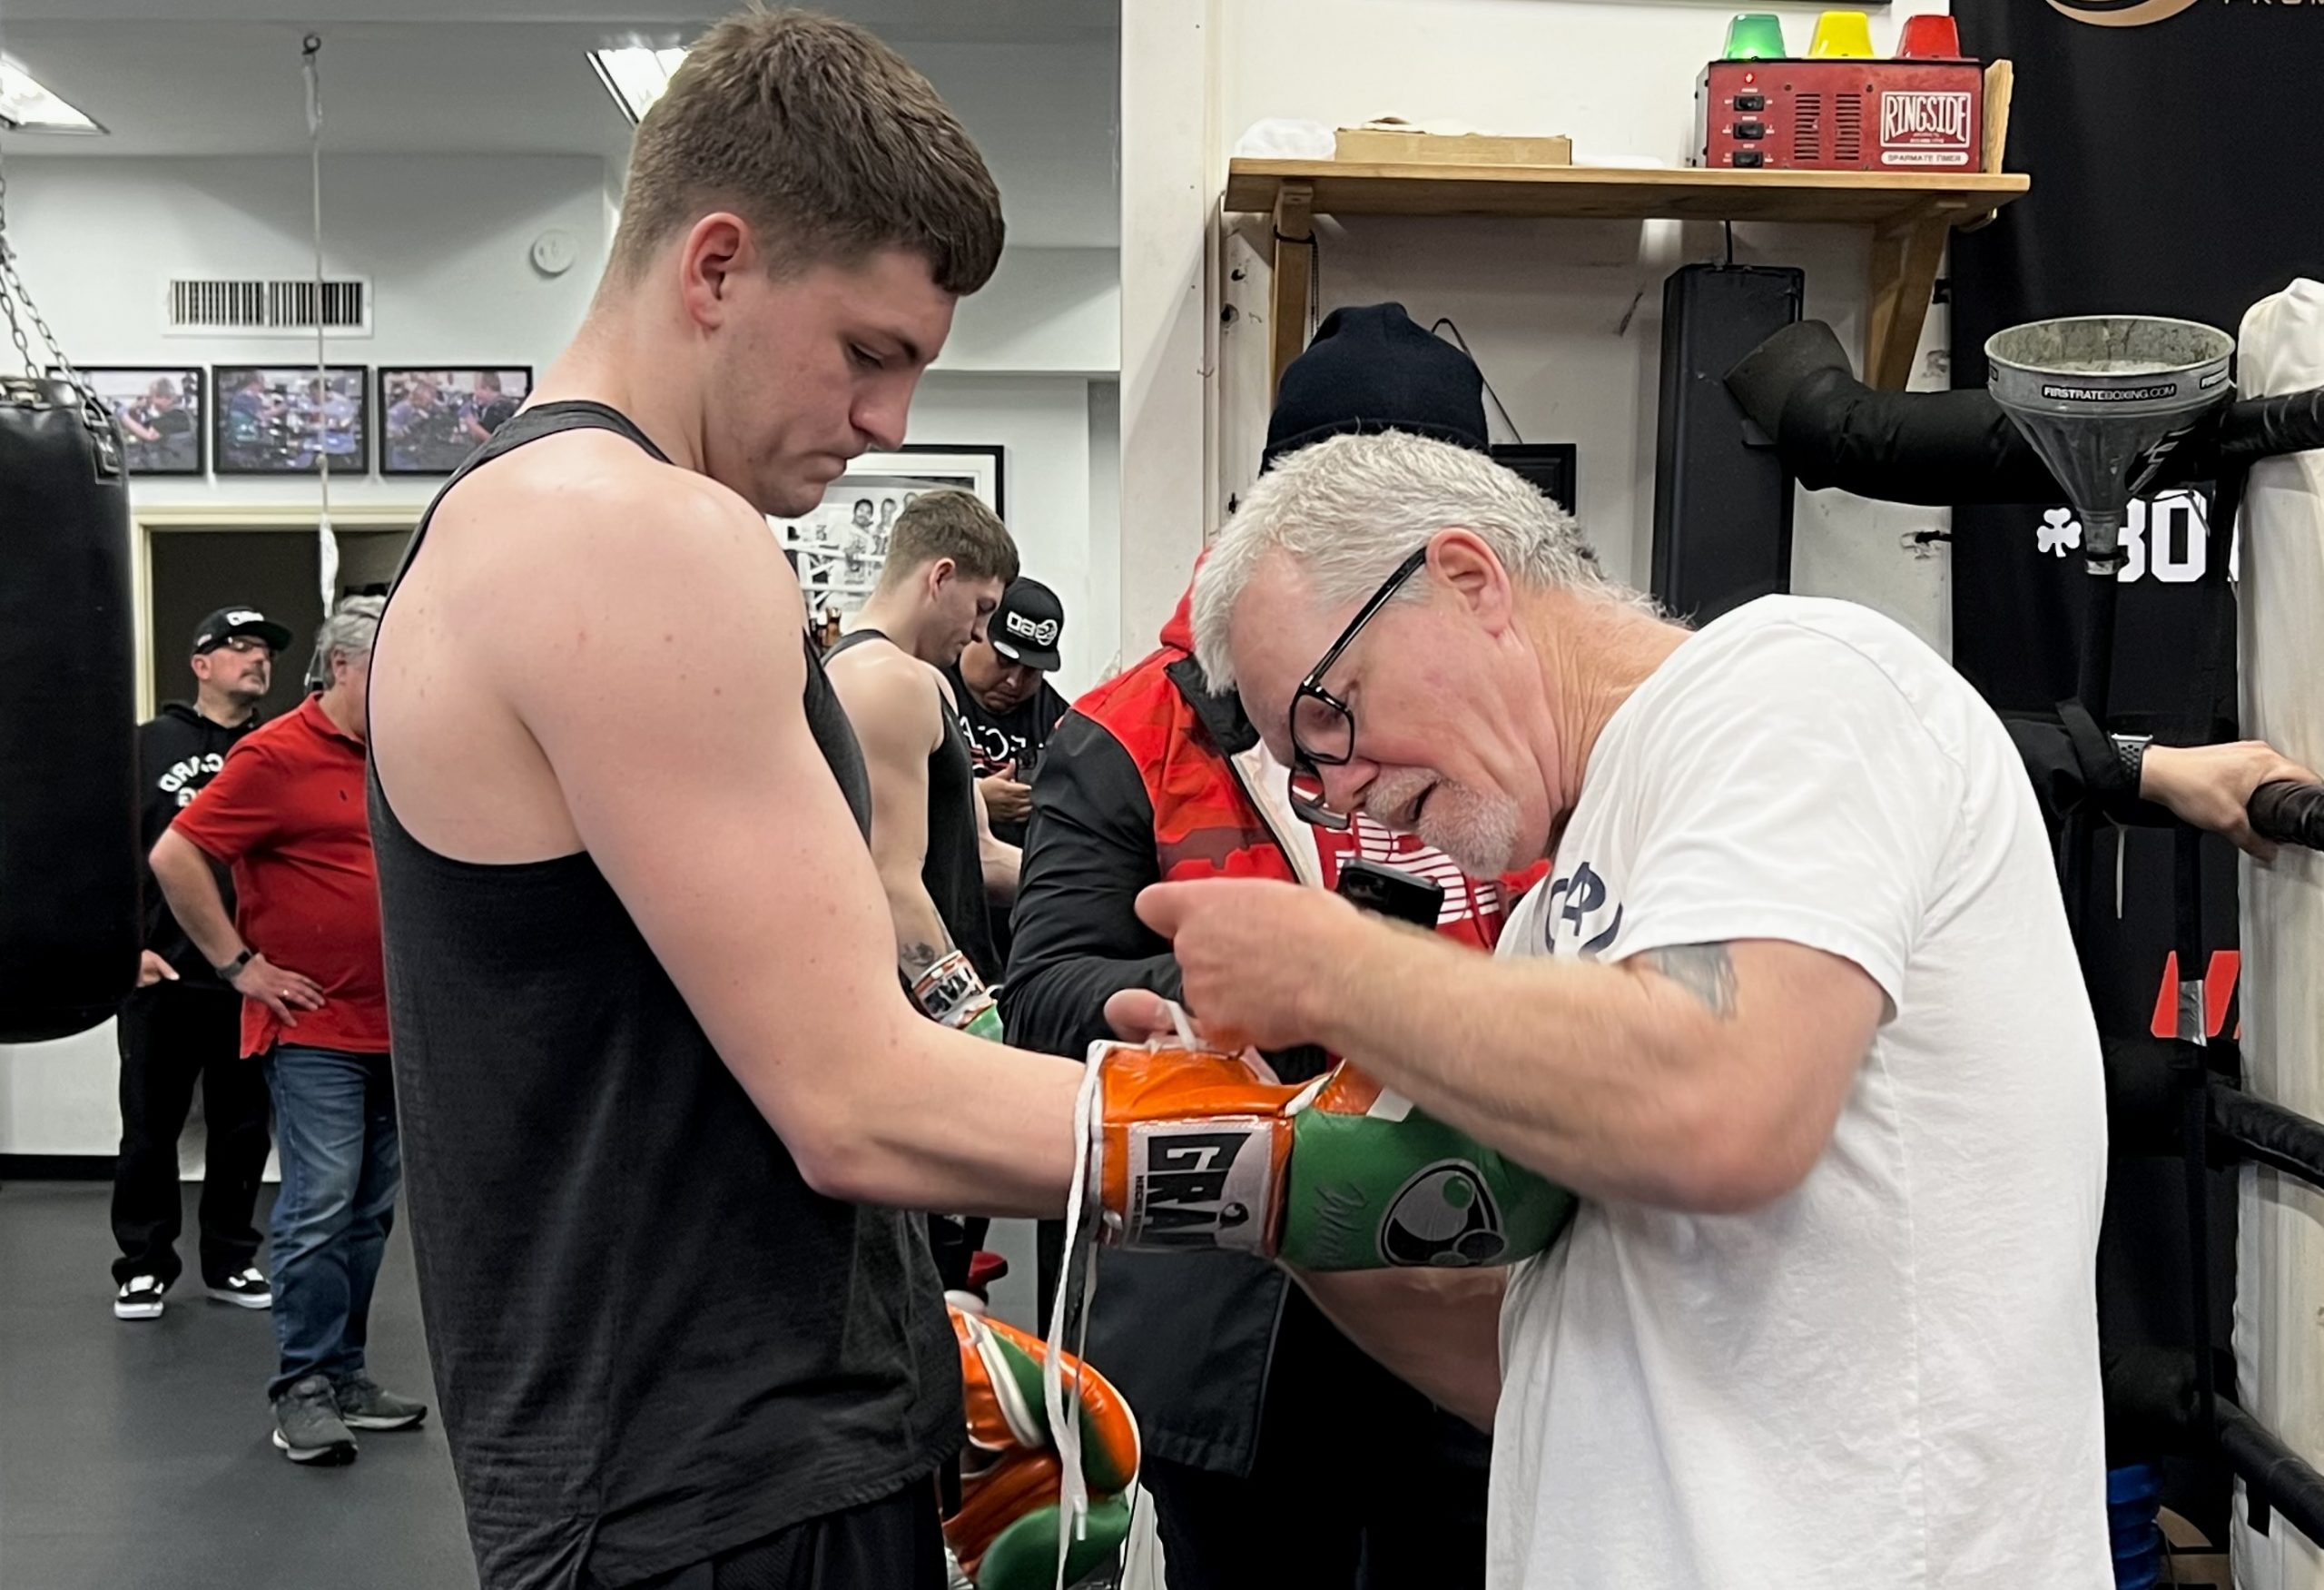 Freddie Roach says Callum Walsh is ready for contenders, White and Loeffler see a future star 